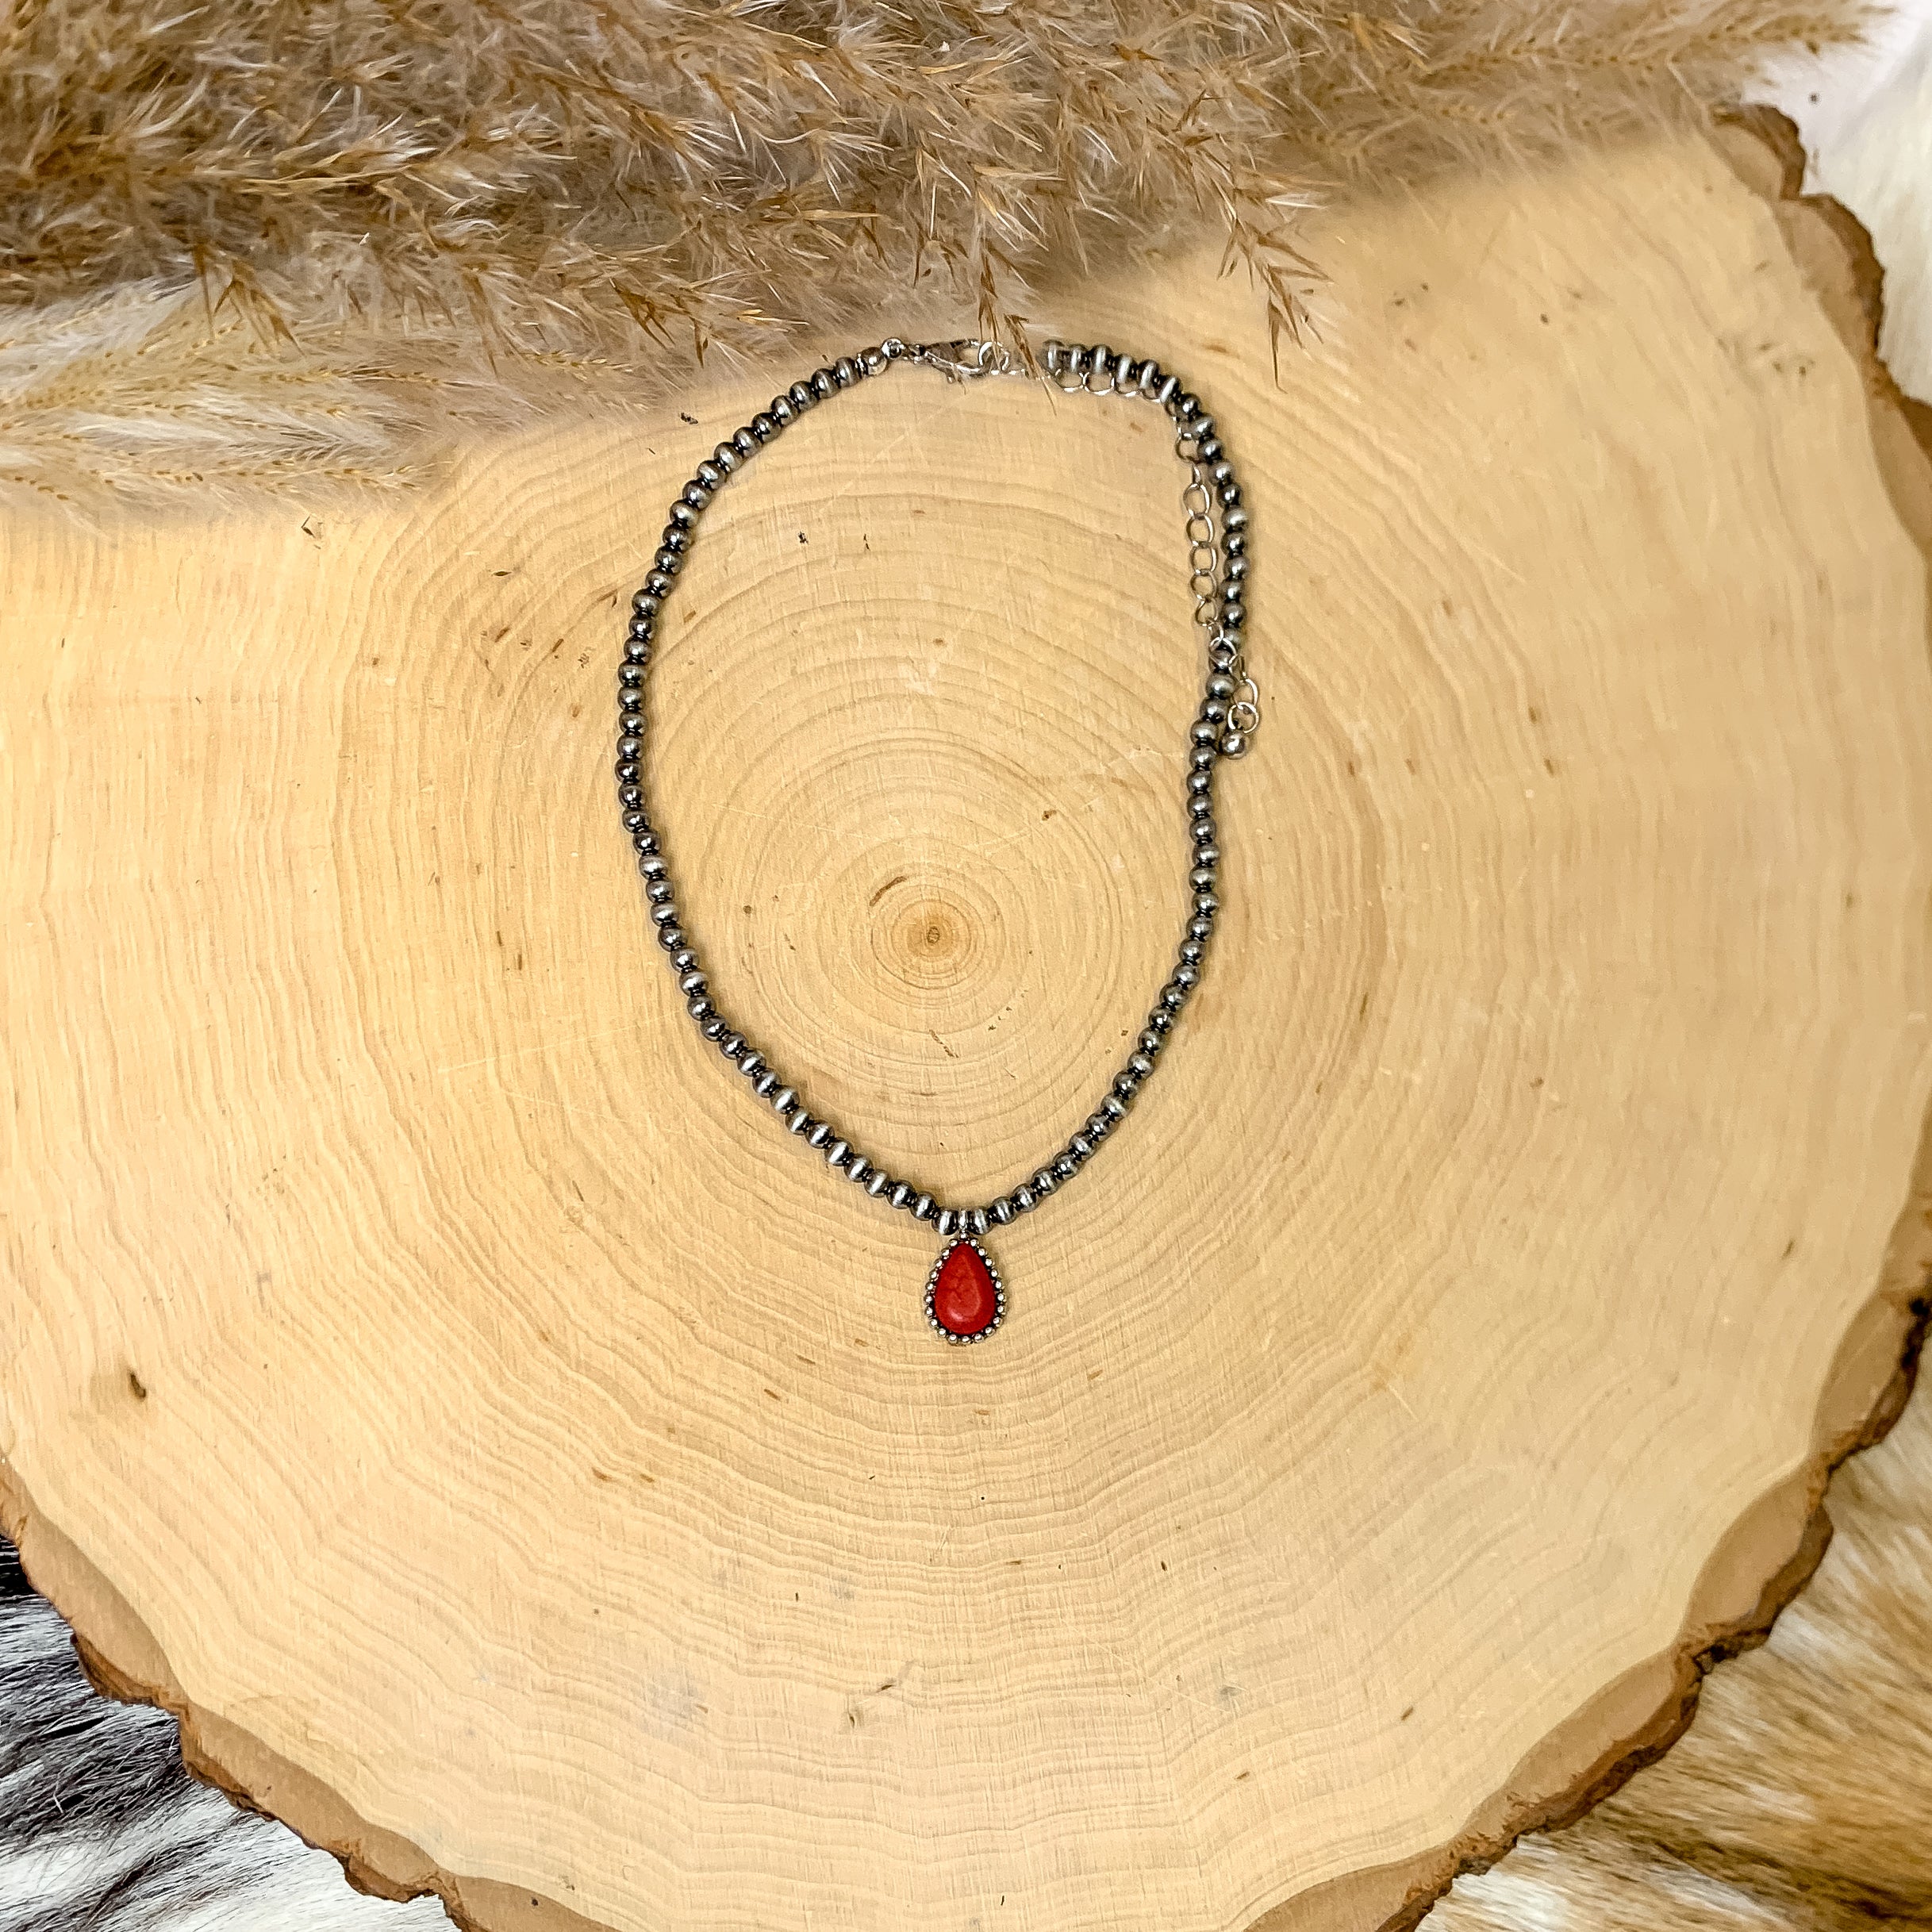 Small Faux Navajo Pearls Choker Necklace in Silver Tone with Red Ornate Teardrop Stone